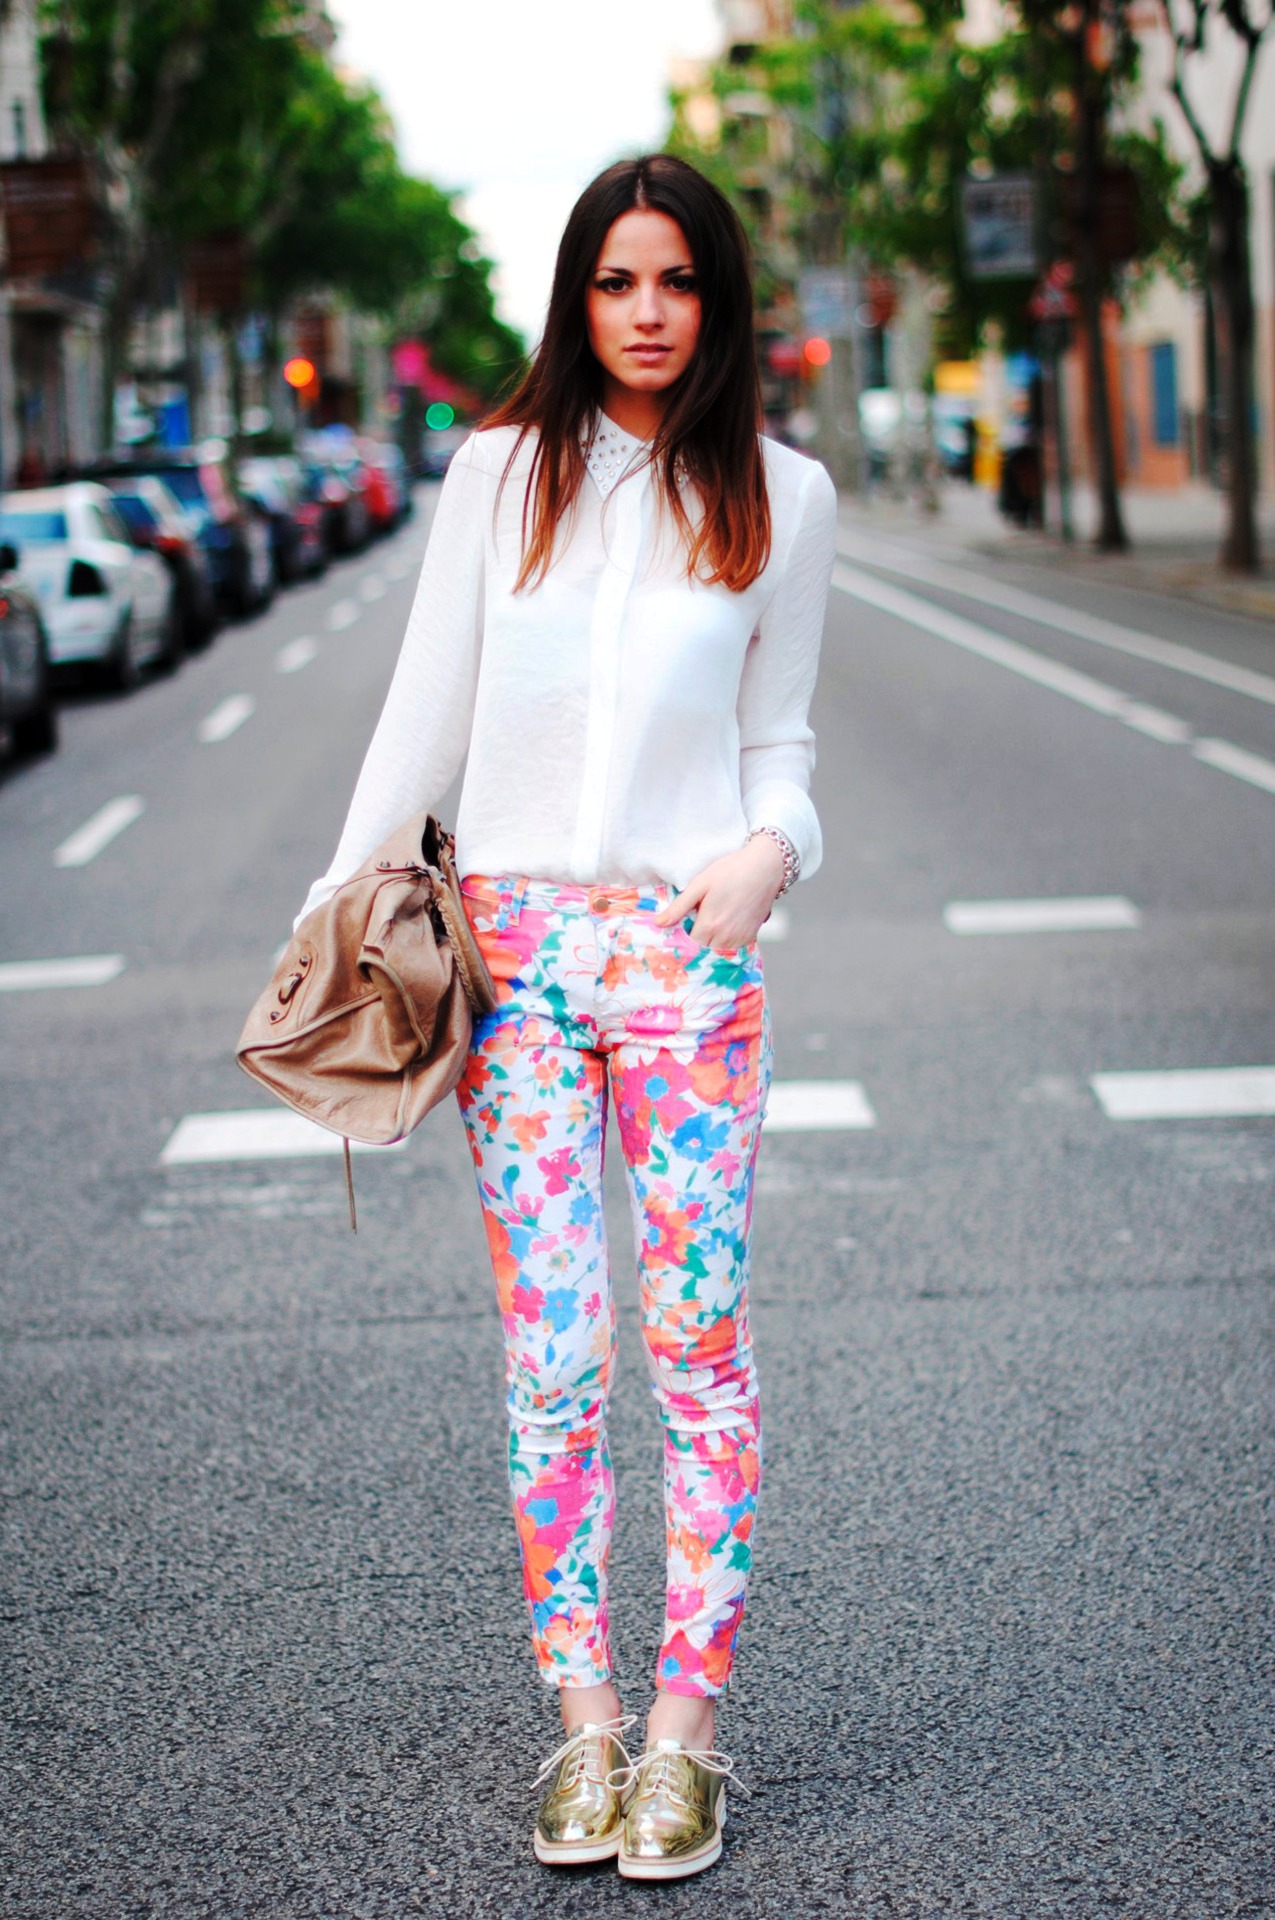 3-Printed Pant Outfit